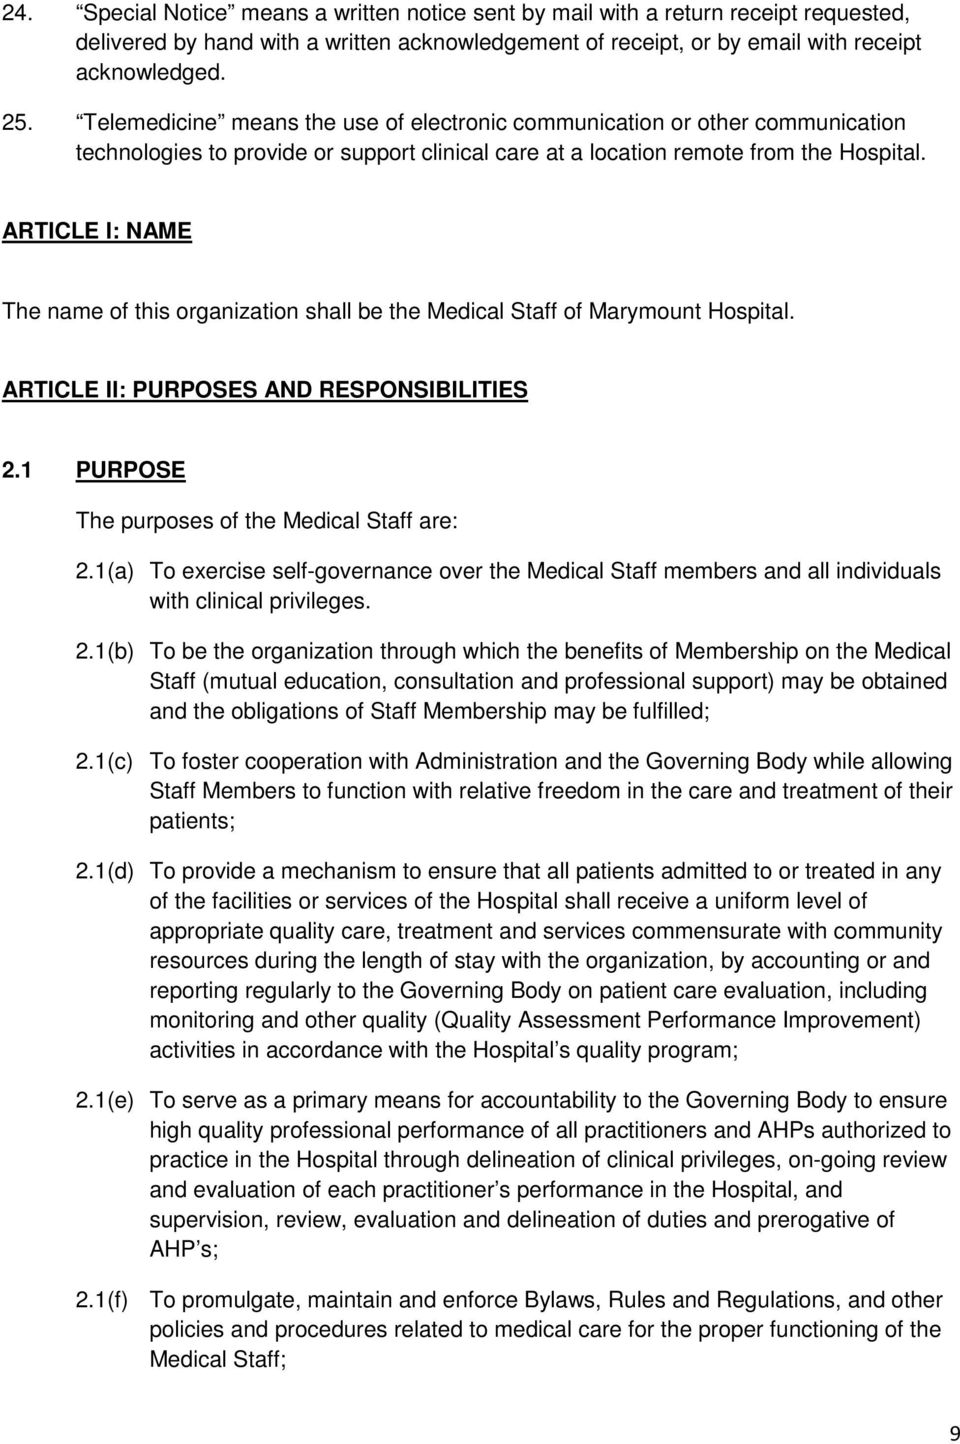 ARTICLE I: NAME The name of this organization shall be the Medical Staff of Marymount Hospital. ARTICLE II: PURPOSES AND RESPONSIBILITIES 2.1 PURPOSE The purposes of the Medical Staff are: 2.